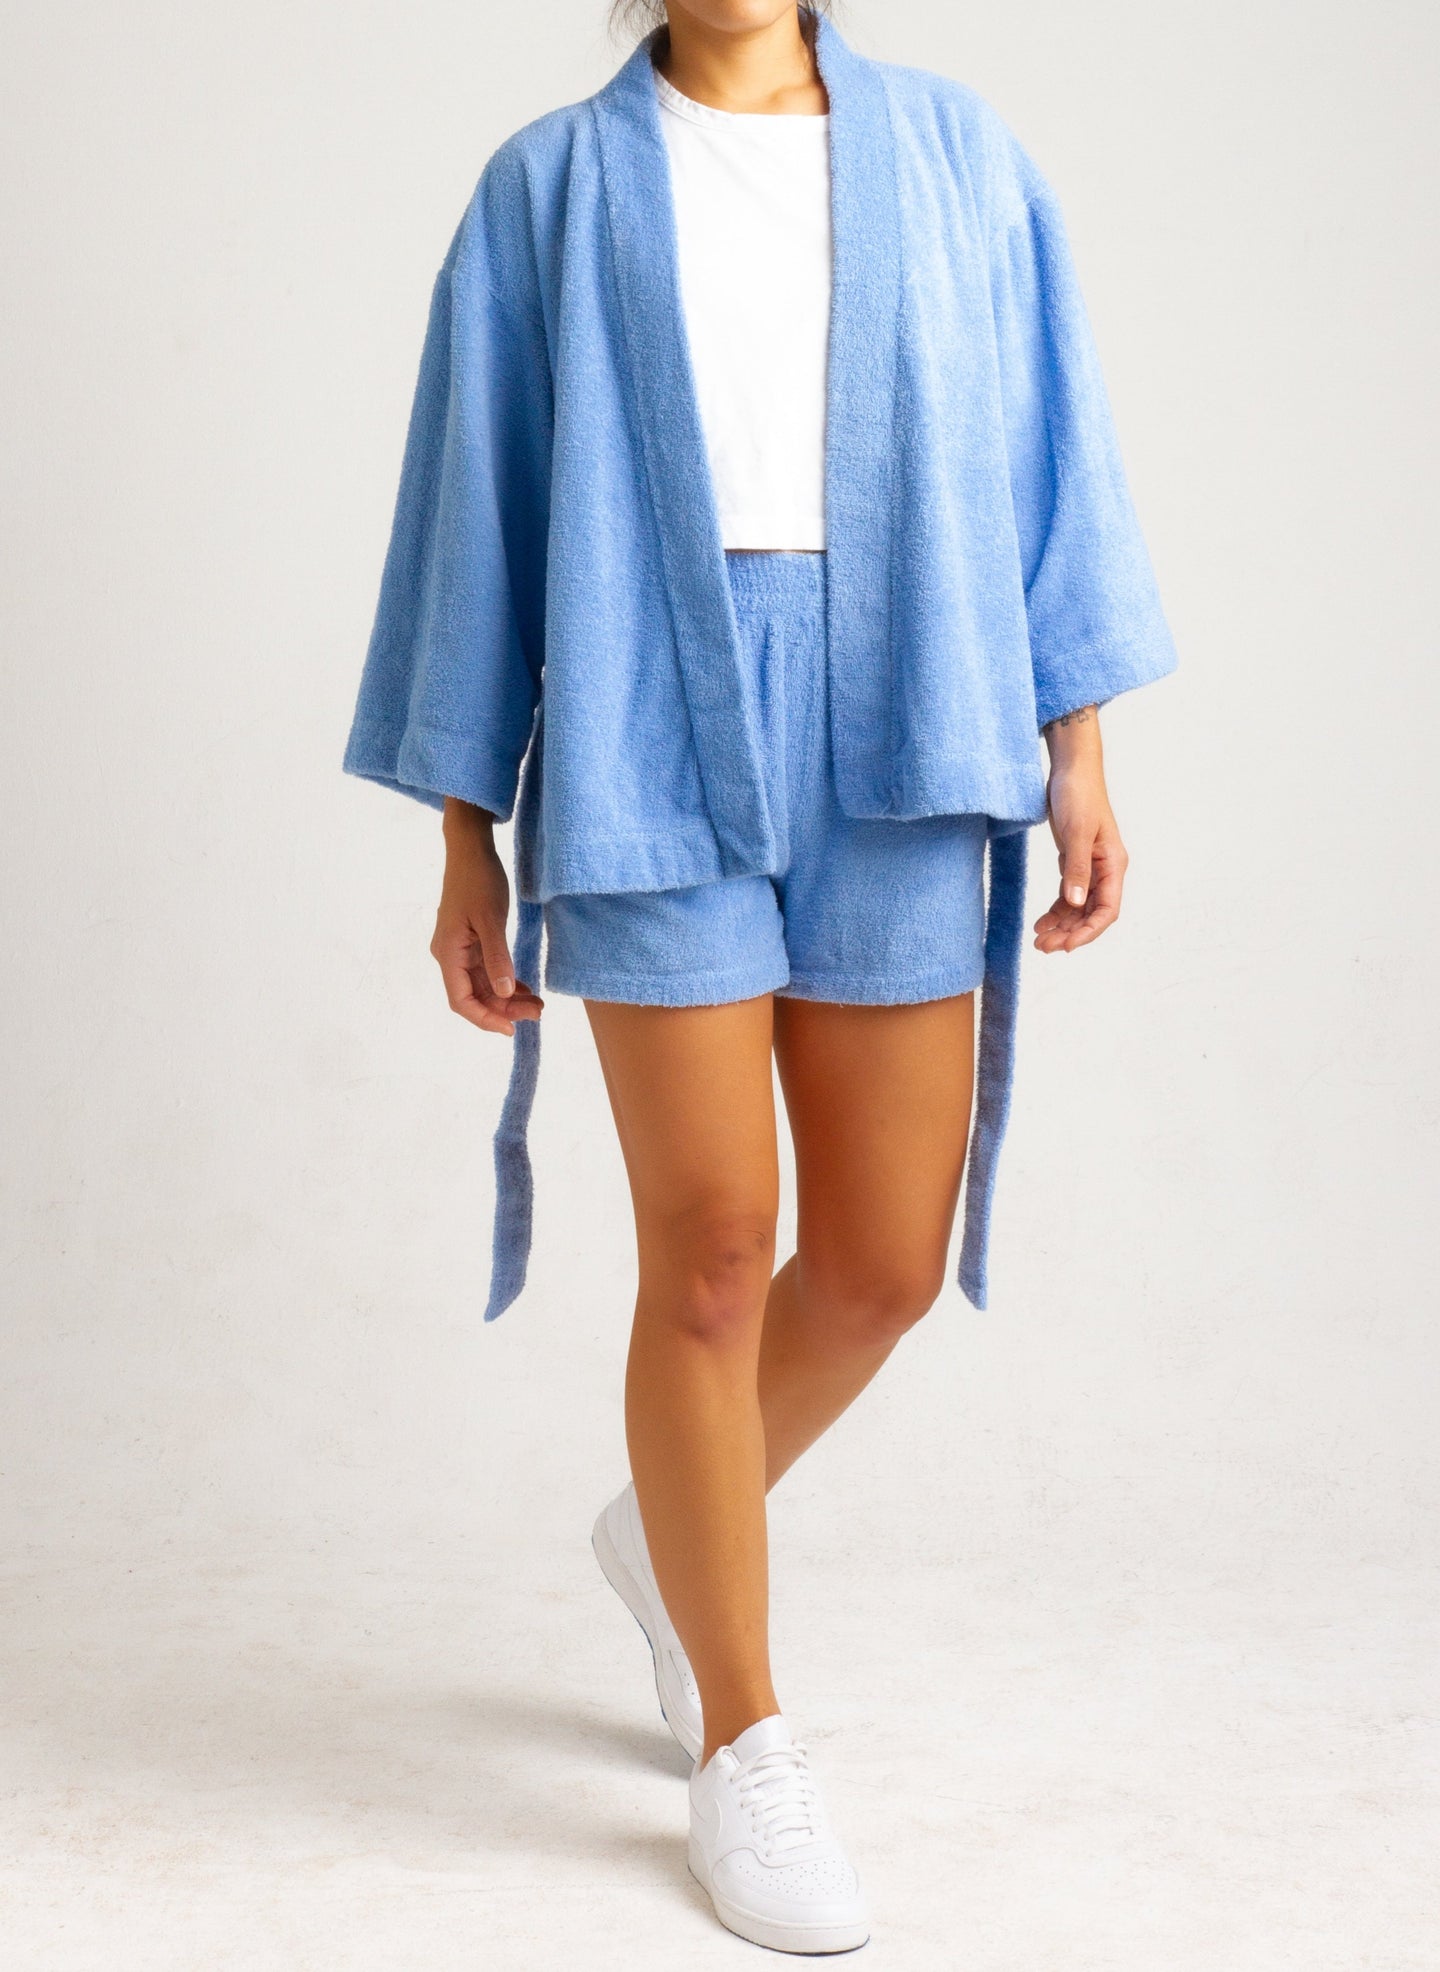 MYER <br> Towel Terry Robe